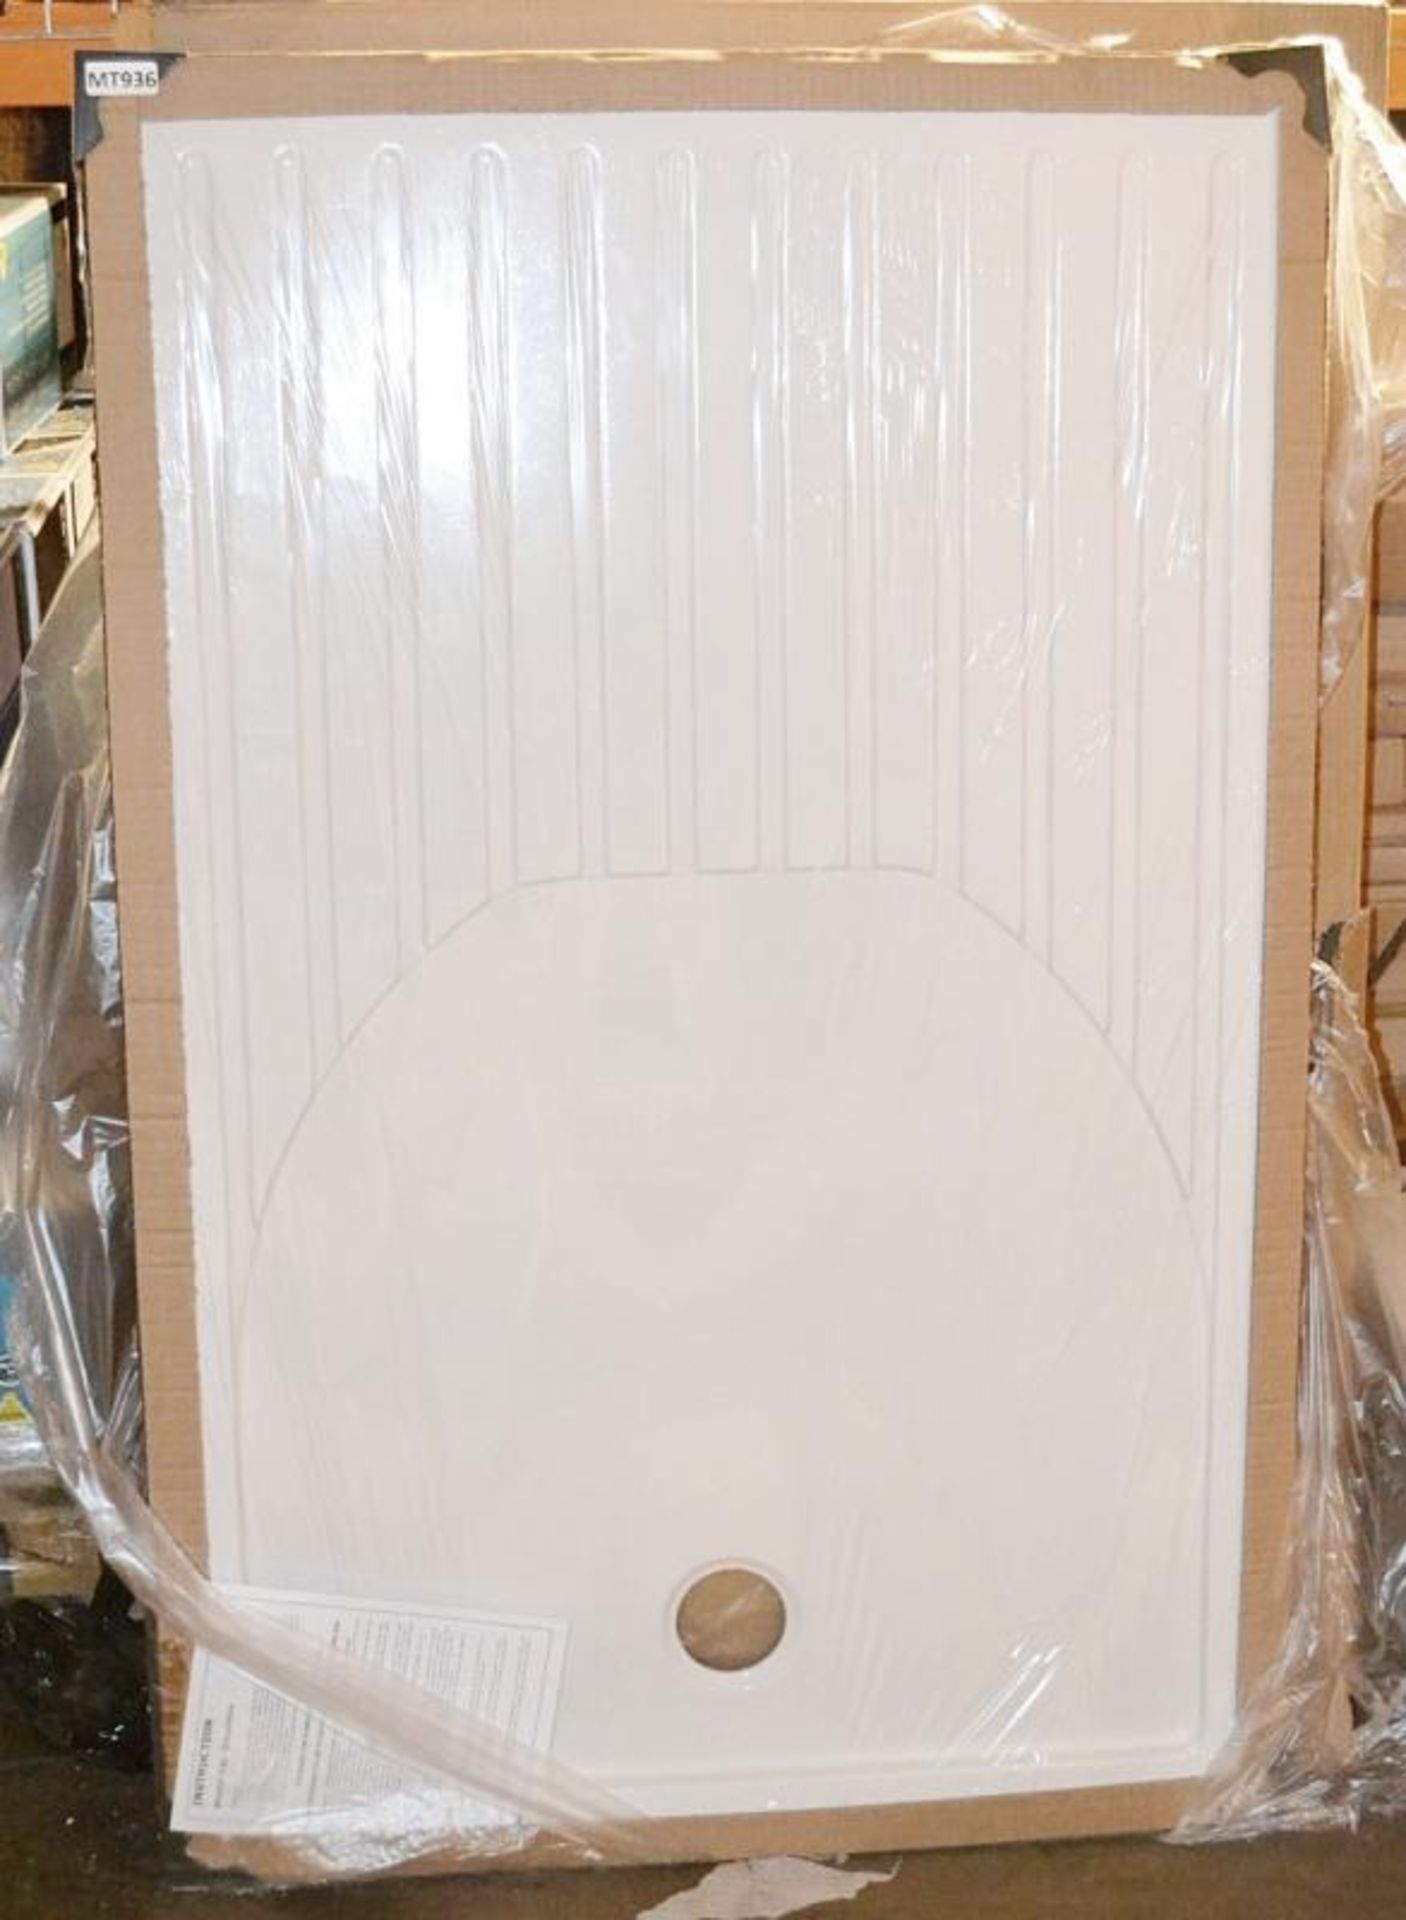 1 x Walk In Rectangular Shower Tray (BSF1490C) - Dimensions: 1400 x 900 x 40cm - New And Boxed Stock - Image 5 of 6